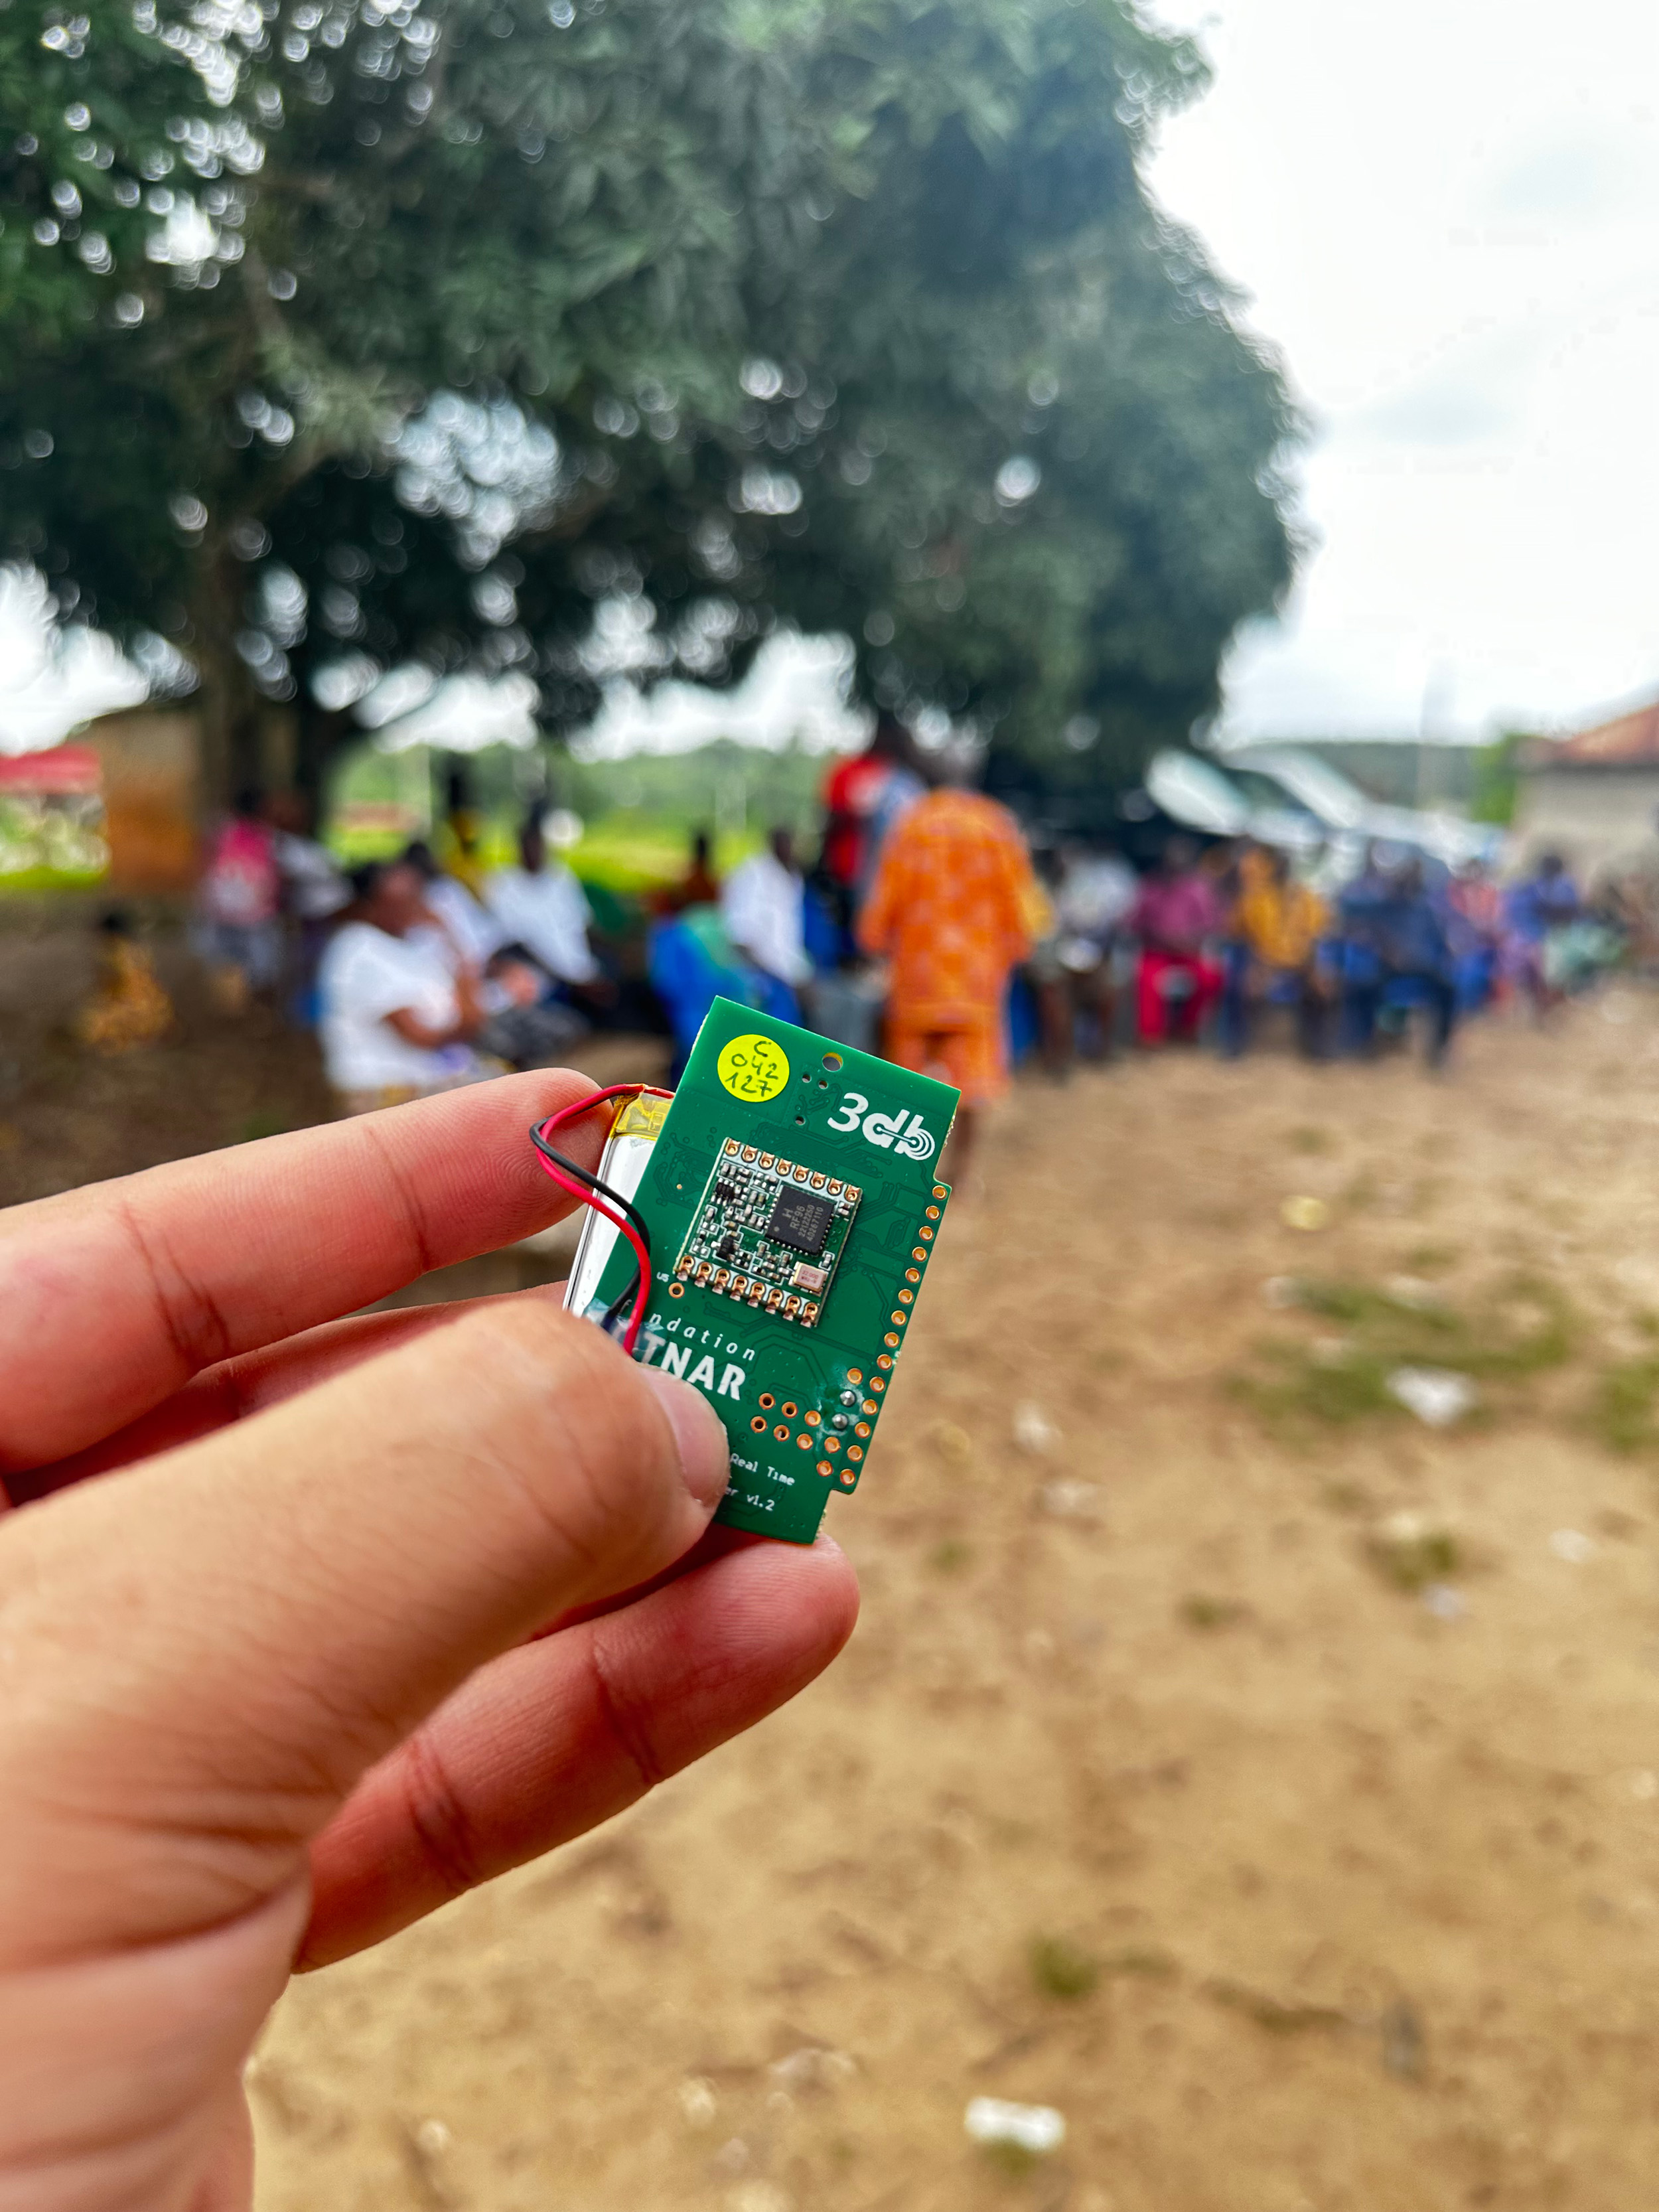 Enlarged view: Hand holding the small green sensor, an African village can be seen in the background.